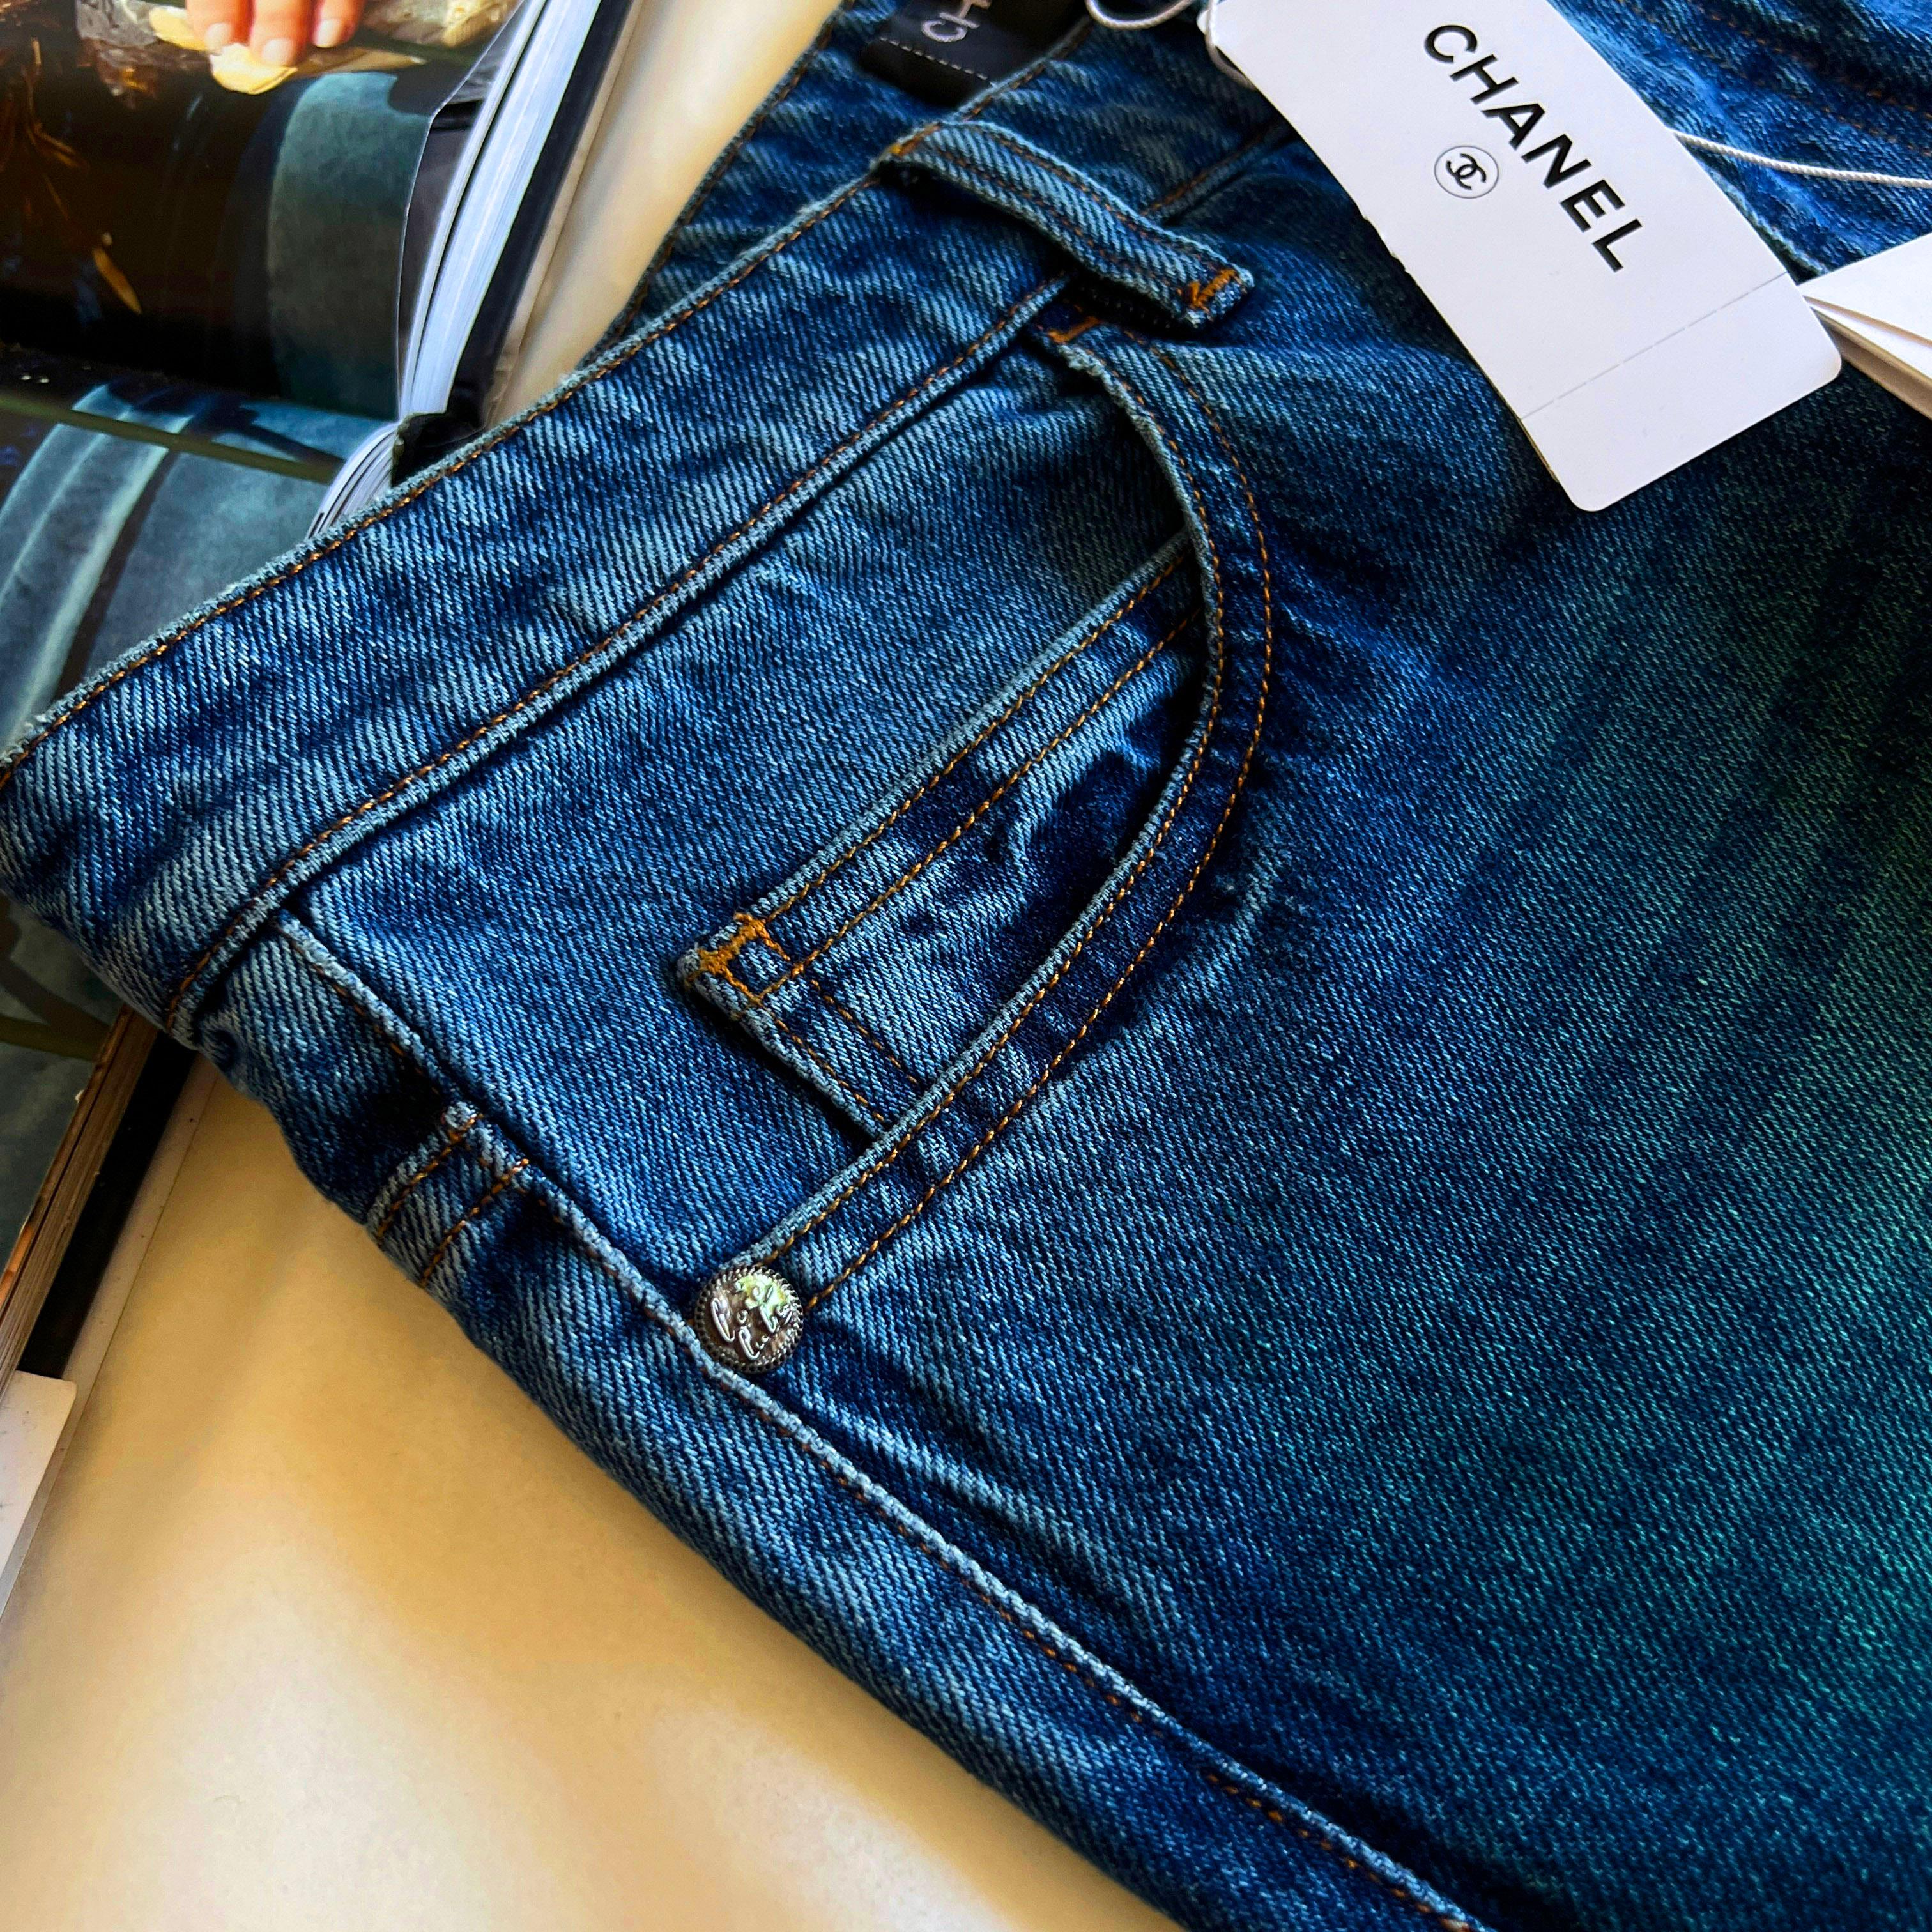 Chanel Cuba Collection Runway Jeans 5